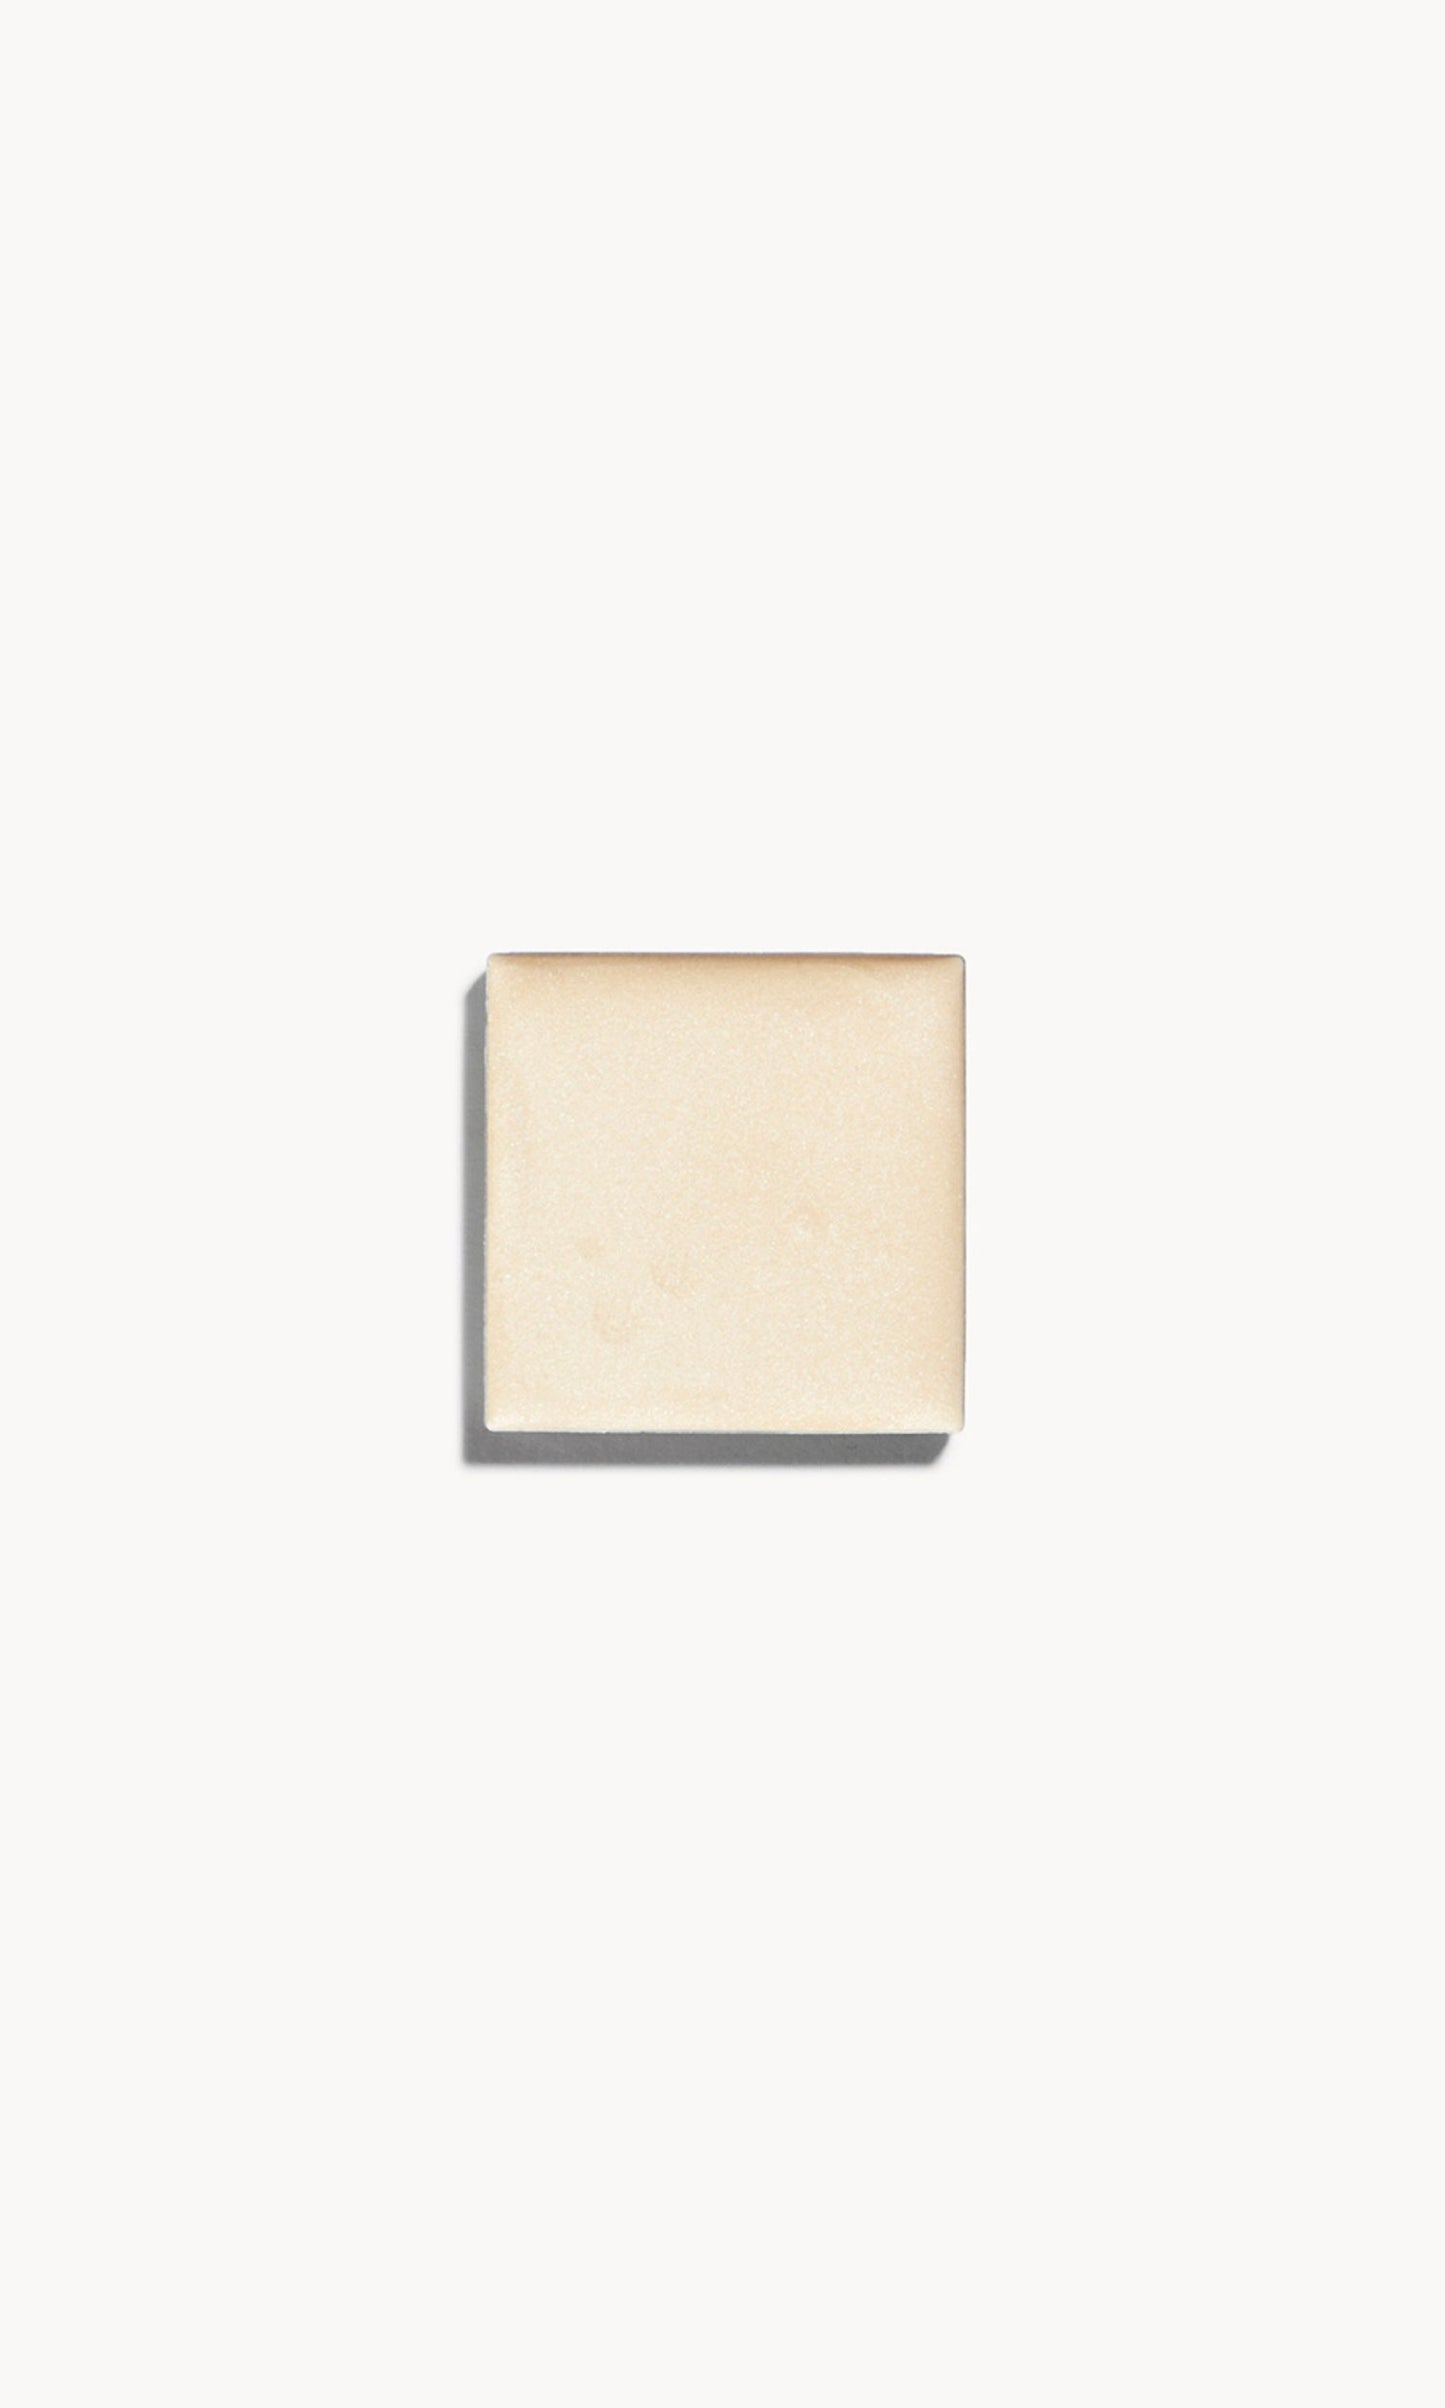 A square of warm golden champagne cream highlighter on a white background